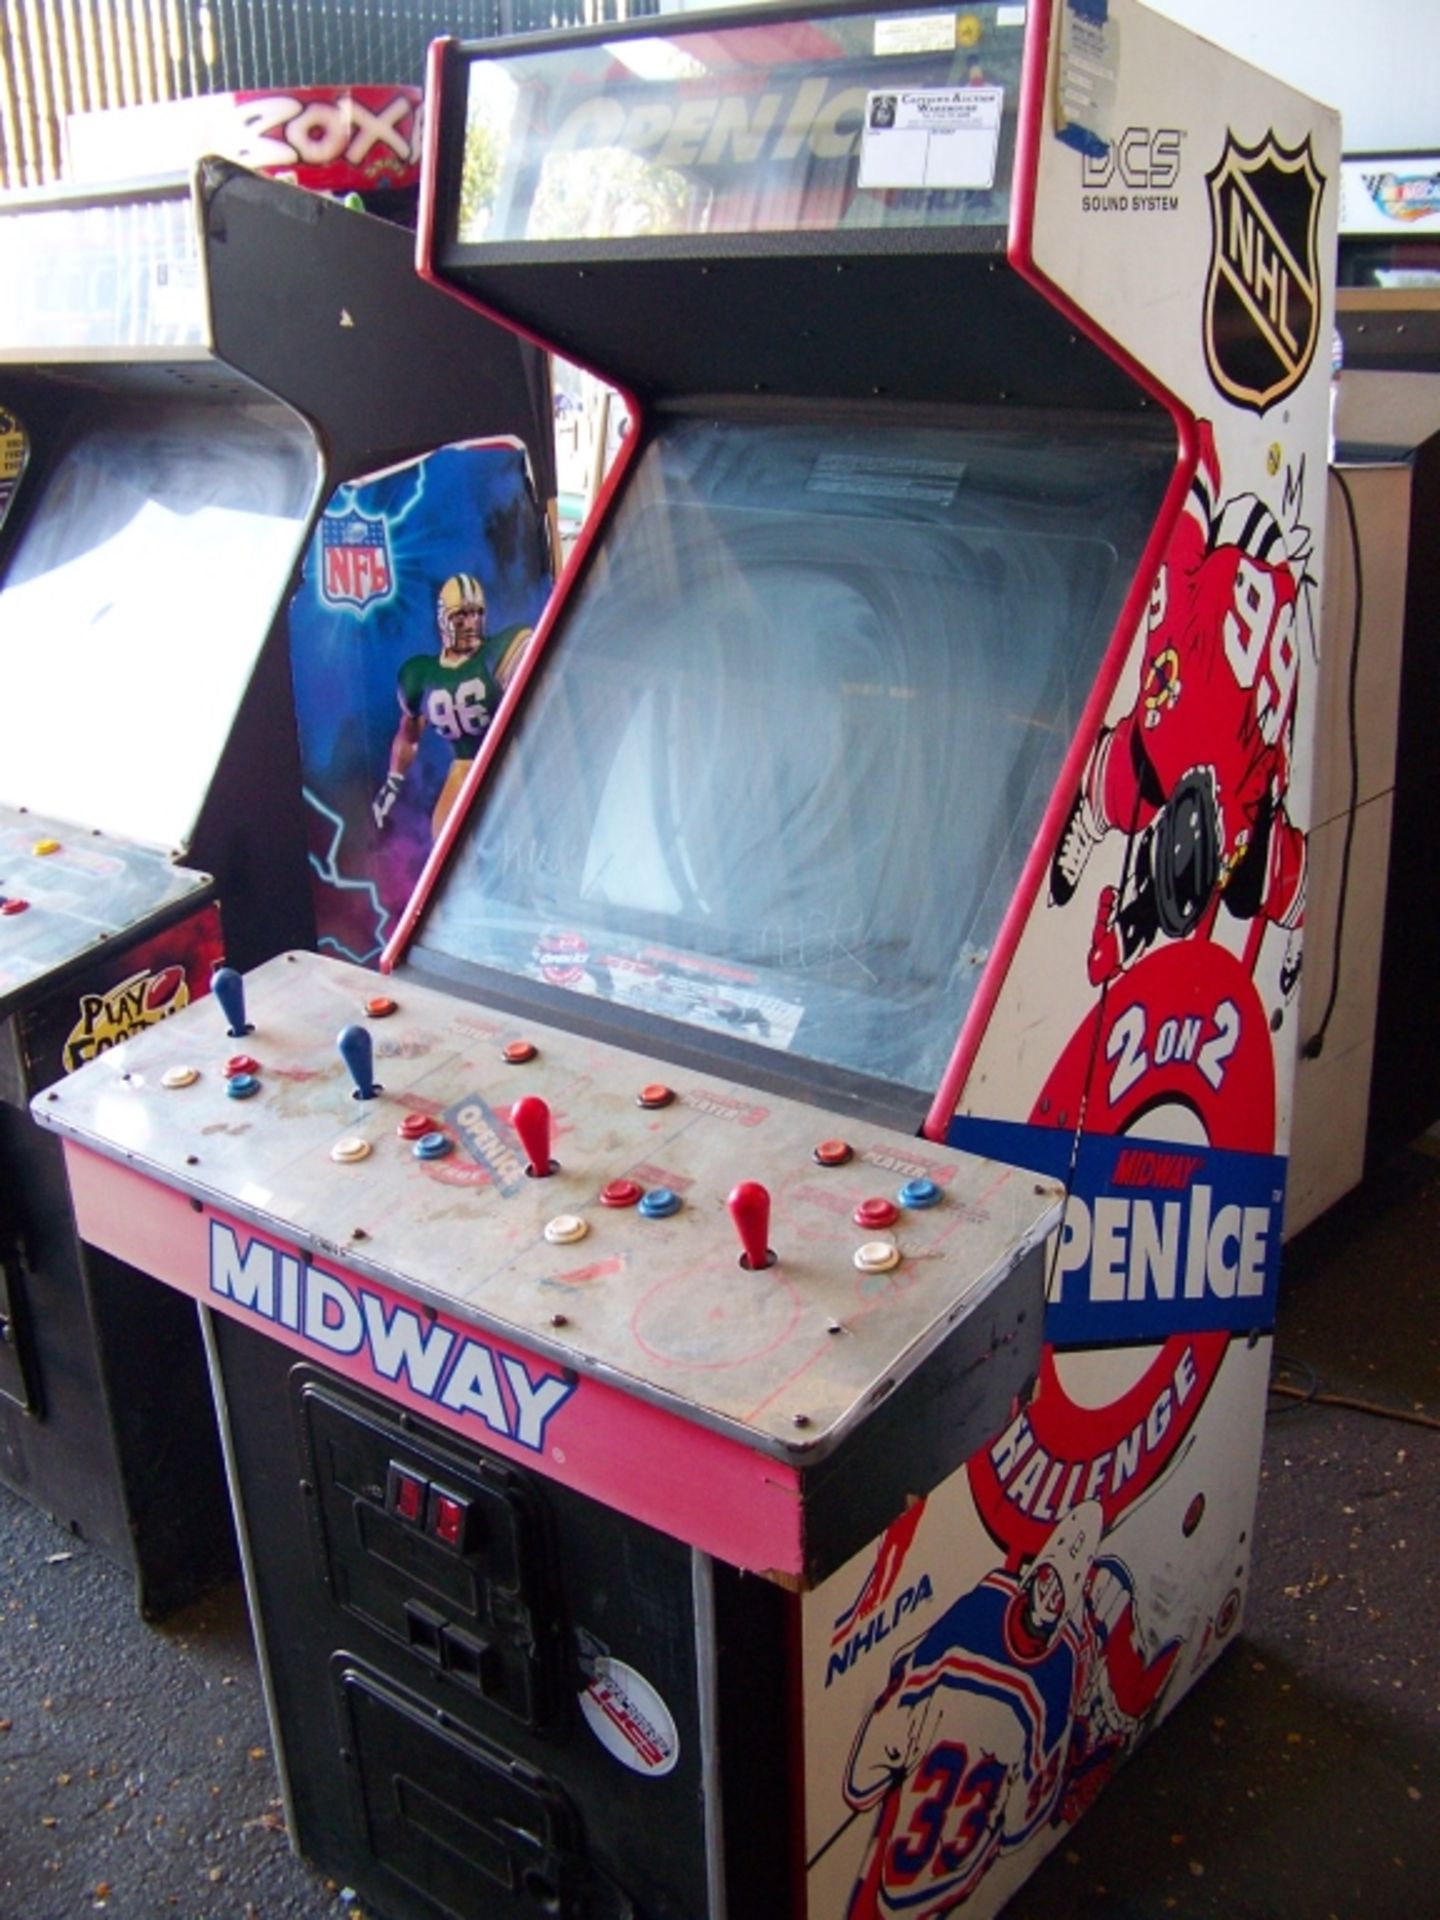 OPEN ICE HOCKEY ARCADE GAME MIDWAY Item is in used condition. Evidence of wear and commercial - Image 2 of 2